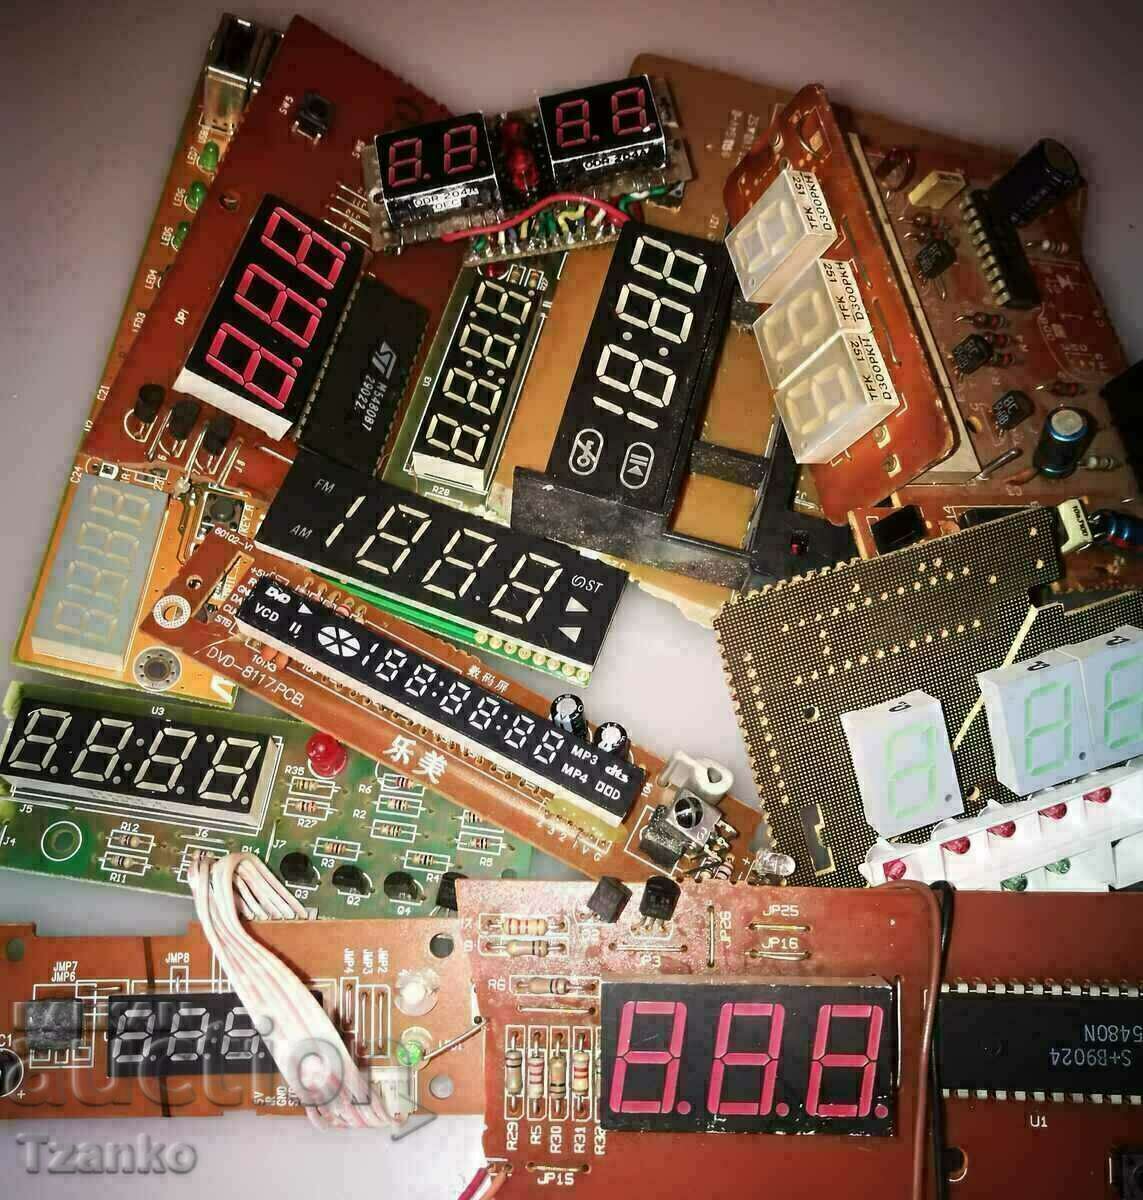 Boards with LED indicators - scrap